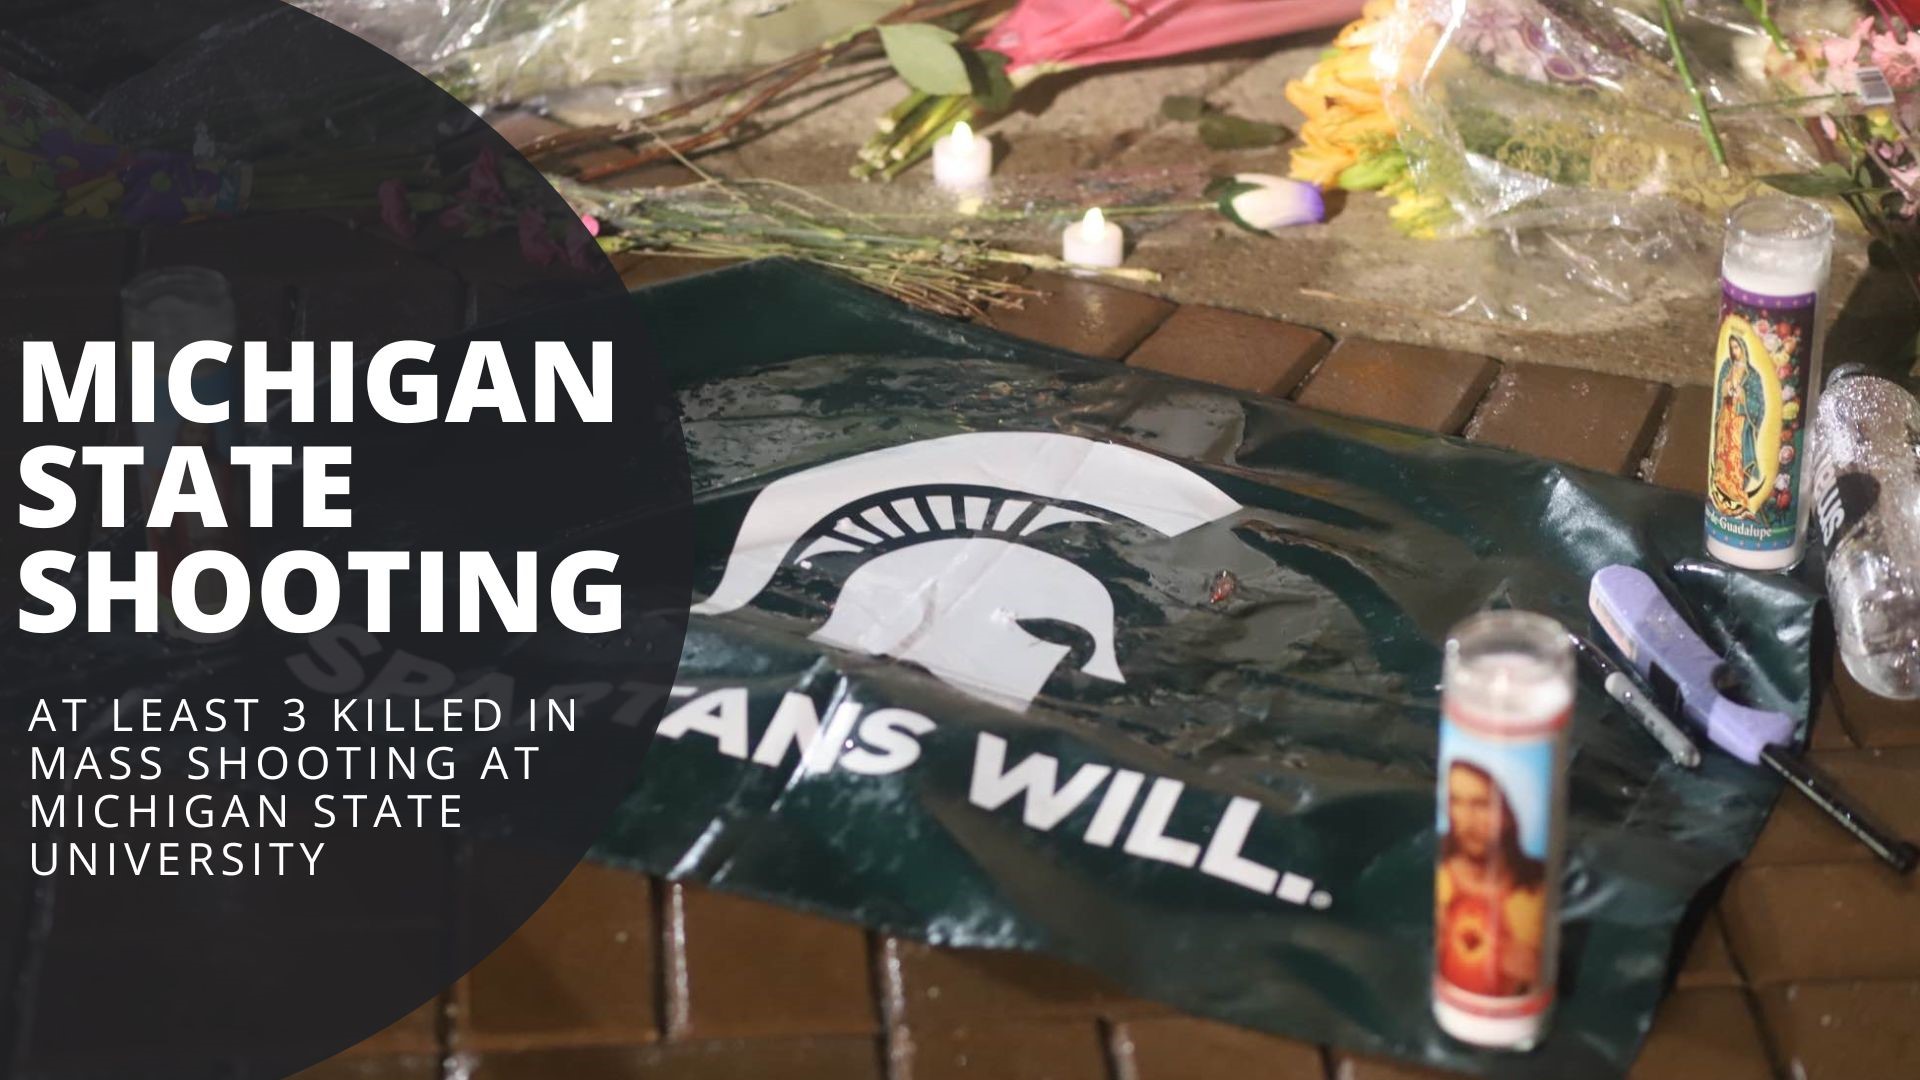 The latest updates on the shooting at Michigan State University on February 13, 2023. 3 students were killed and 5 others critically injured.